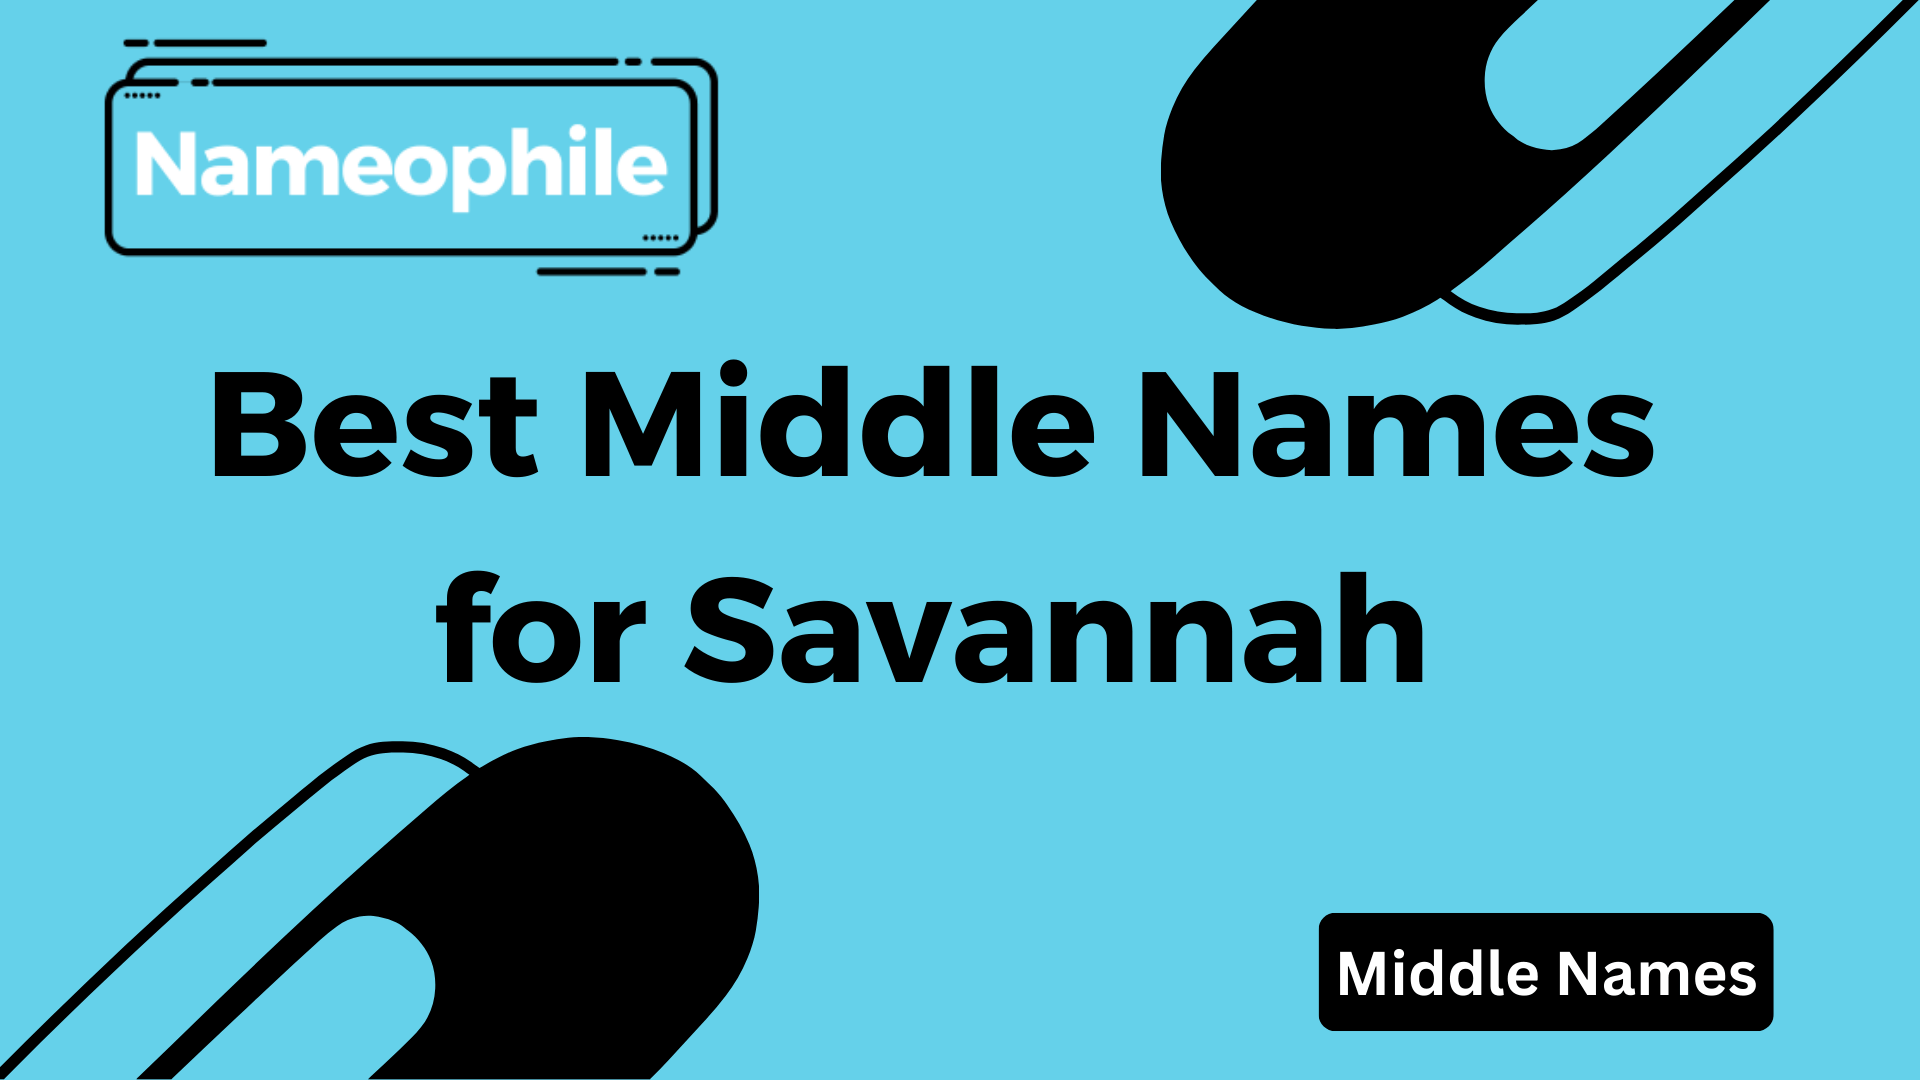 Best Middle Names for Savannah